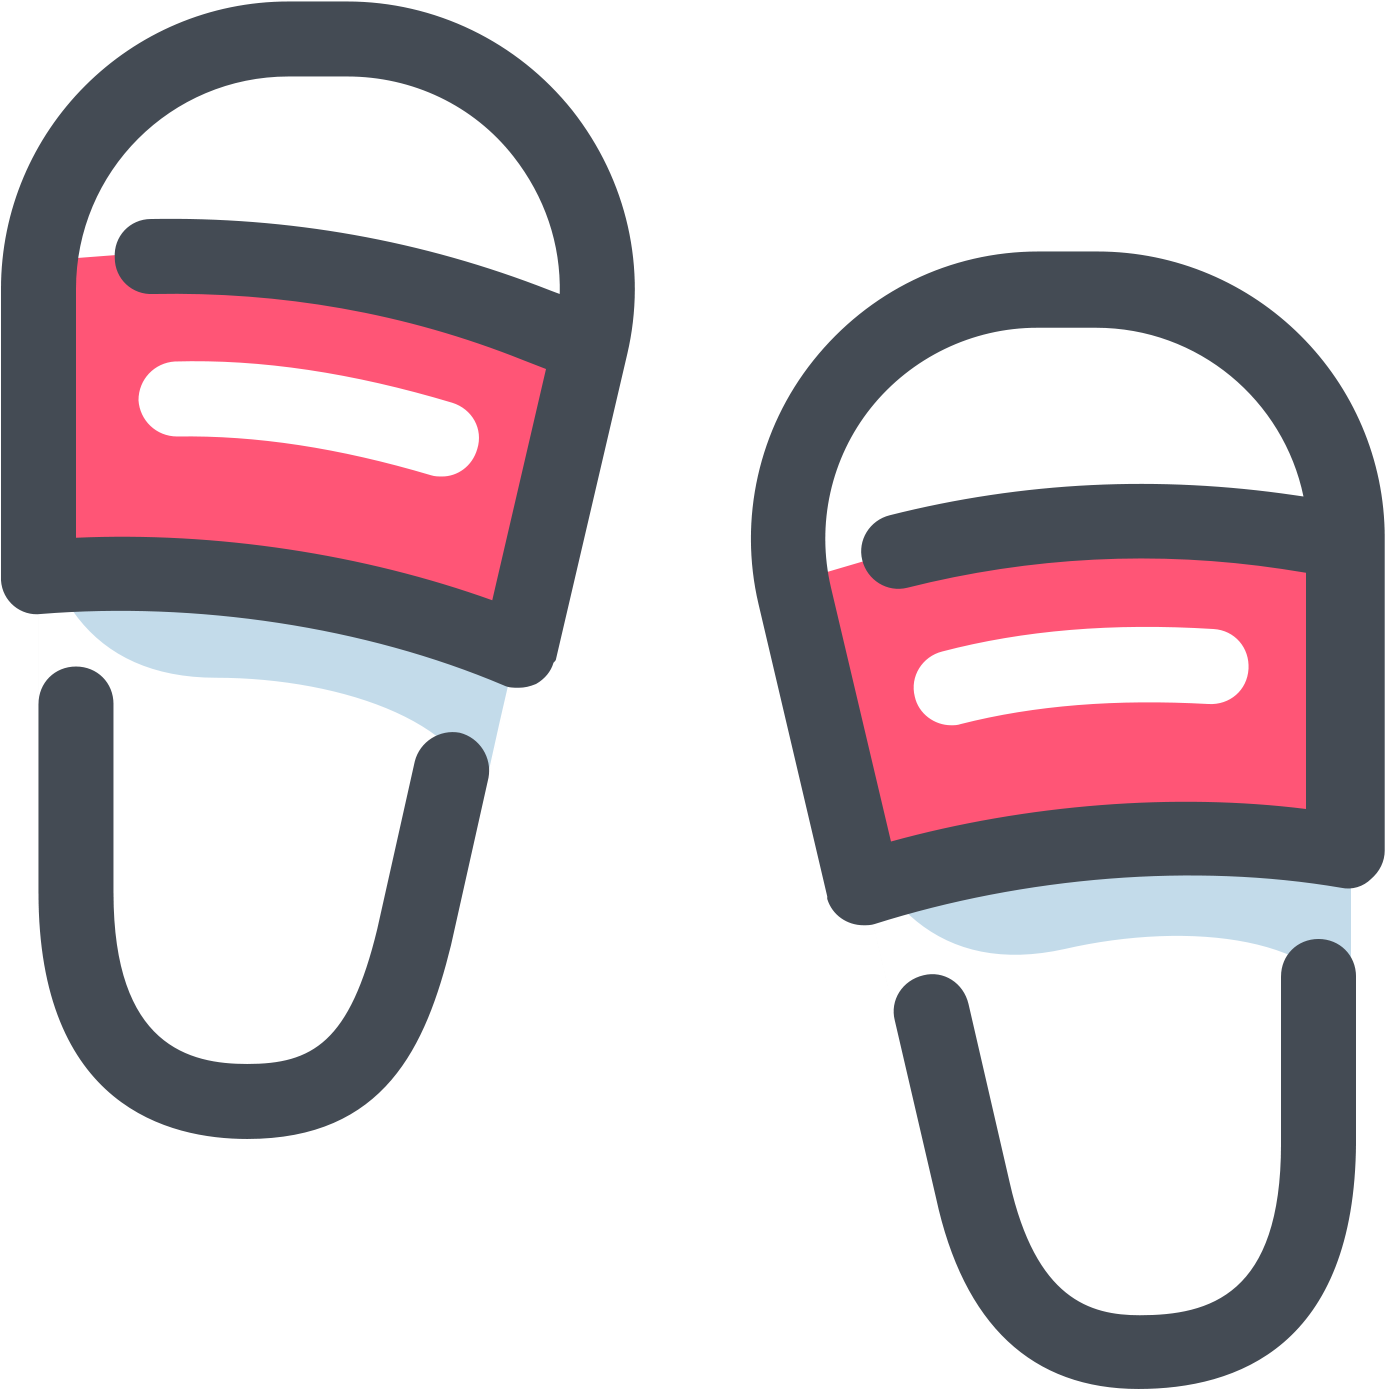 Home slippers icon, outline style - Stock Illustration [66396227] - PIXTA